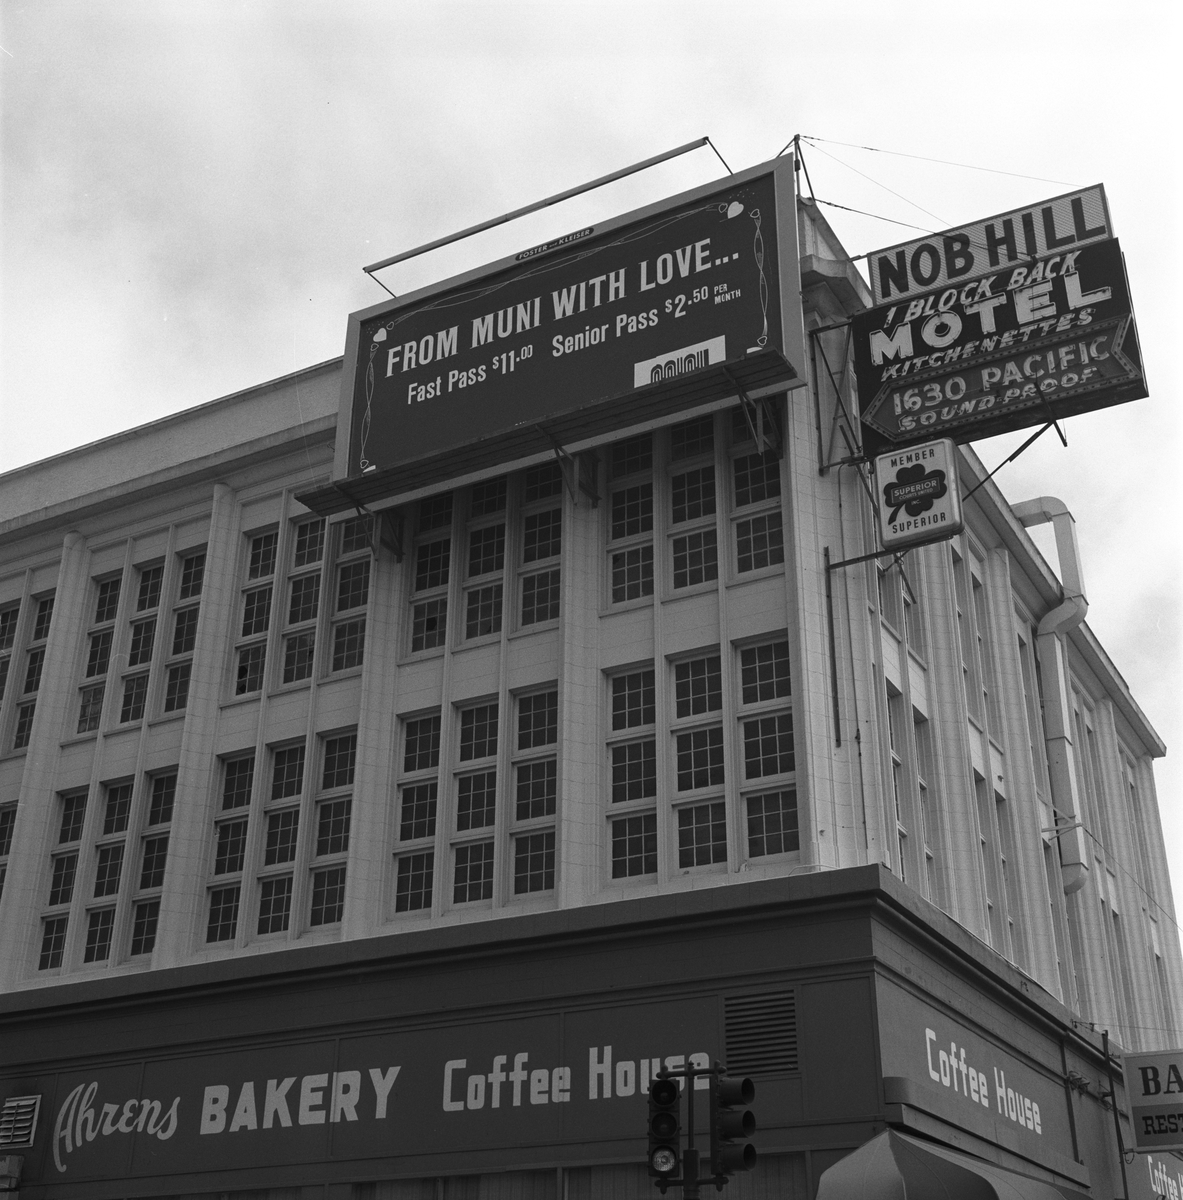 Black and white photo of a billboard and other signs on a large, square building. Billboard reads, "From Muni with Love..., Fast Pass $11.00, Senior Pass $2.50"